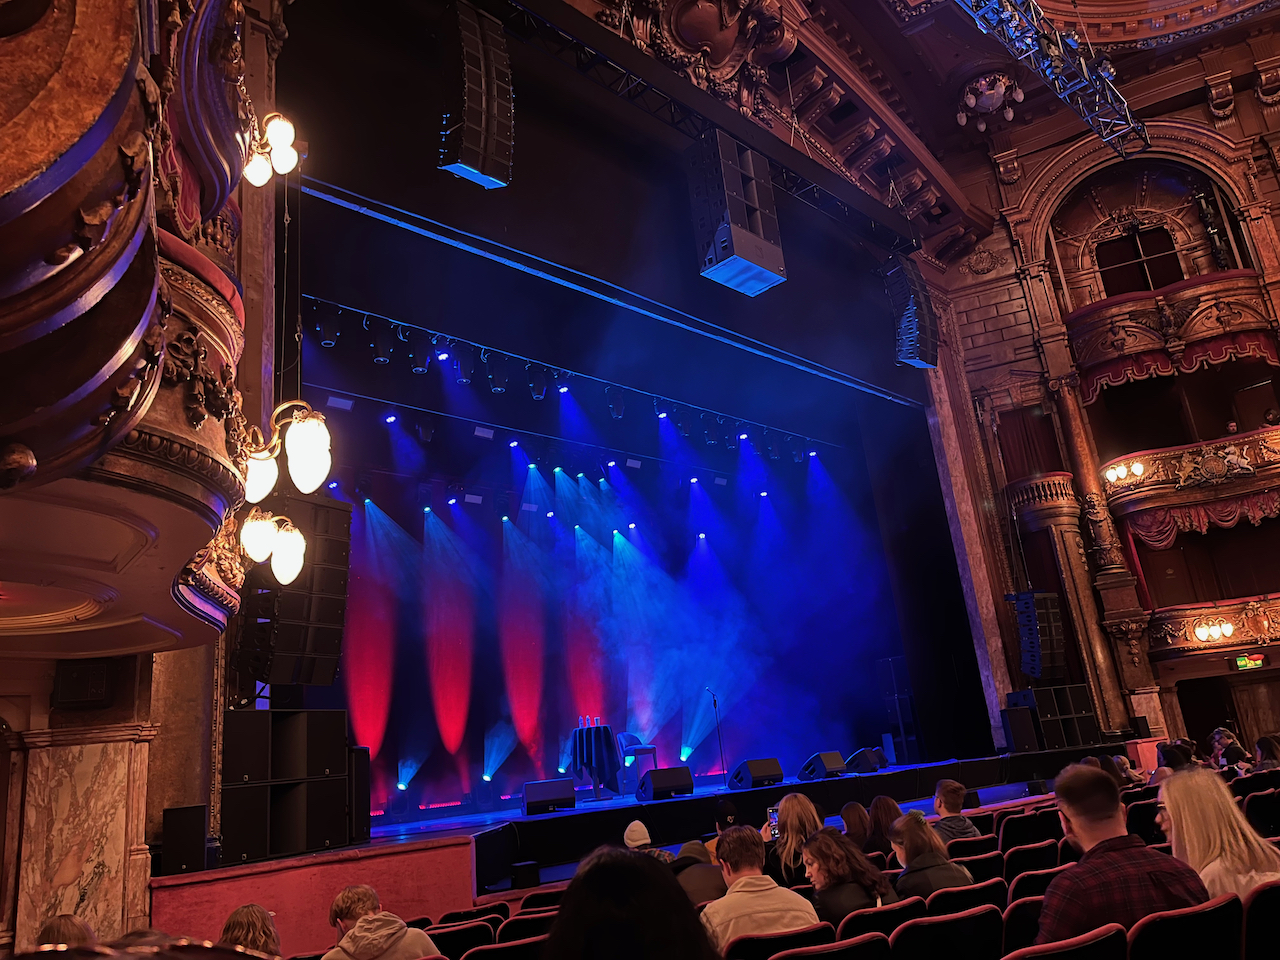 The stage in the London Palladium, with blue lighting.